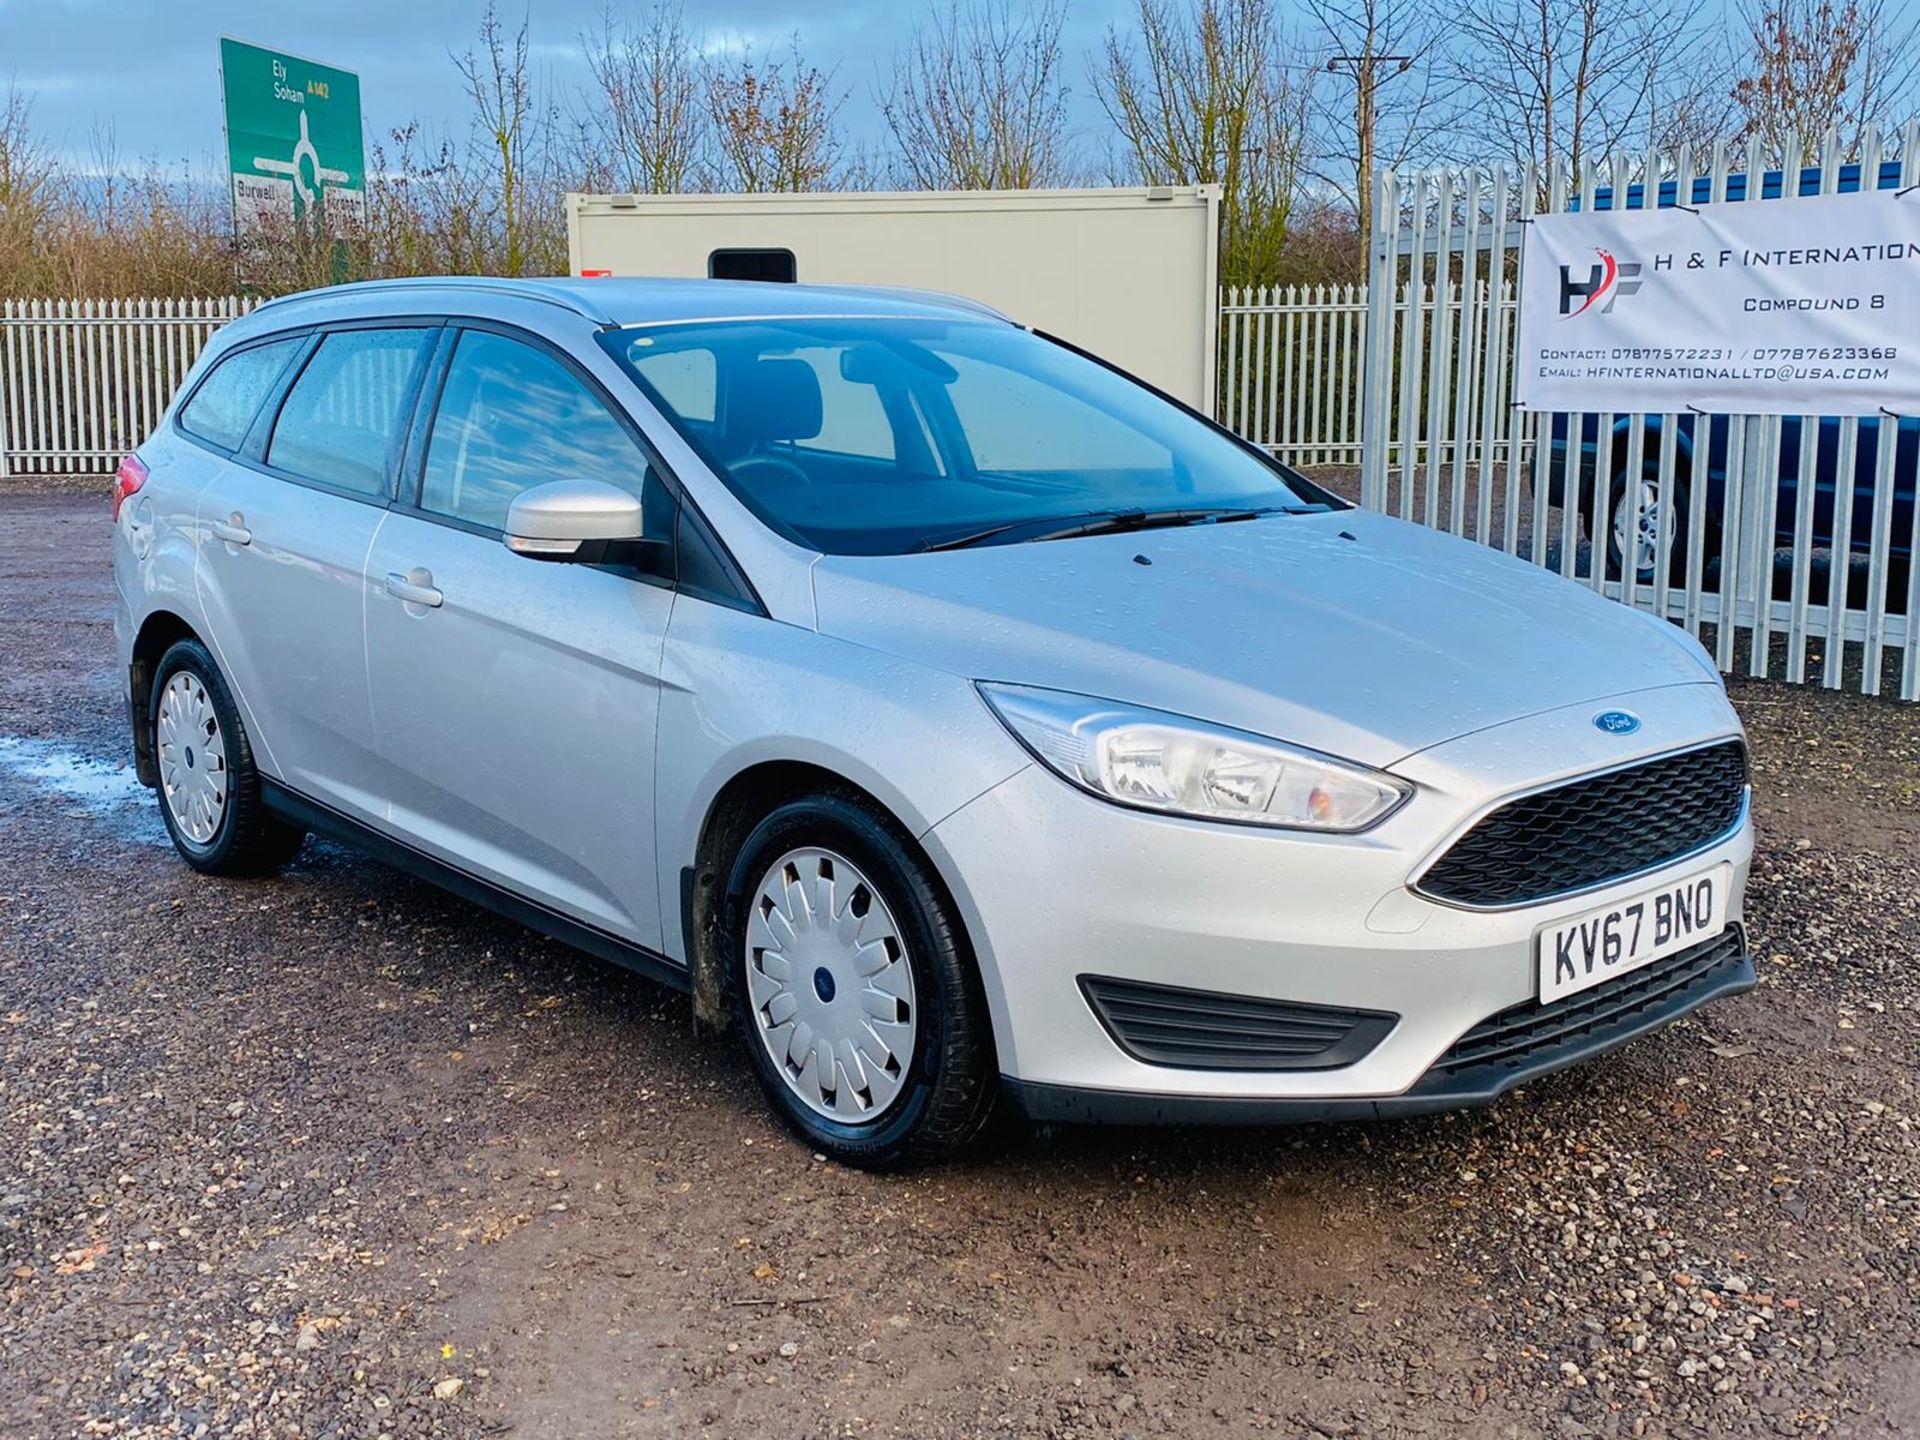 (RESERVE MET) Ford Focus Estate Style 1.5 TDCI 105Bhp Econetic - 2018 Model - Air Con - Image 13 of 29